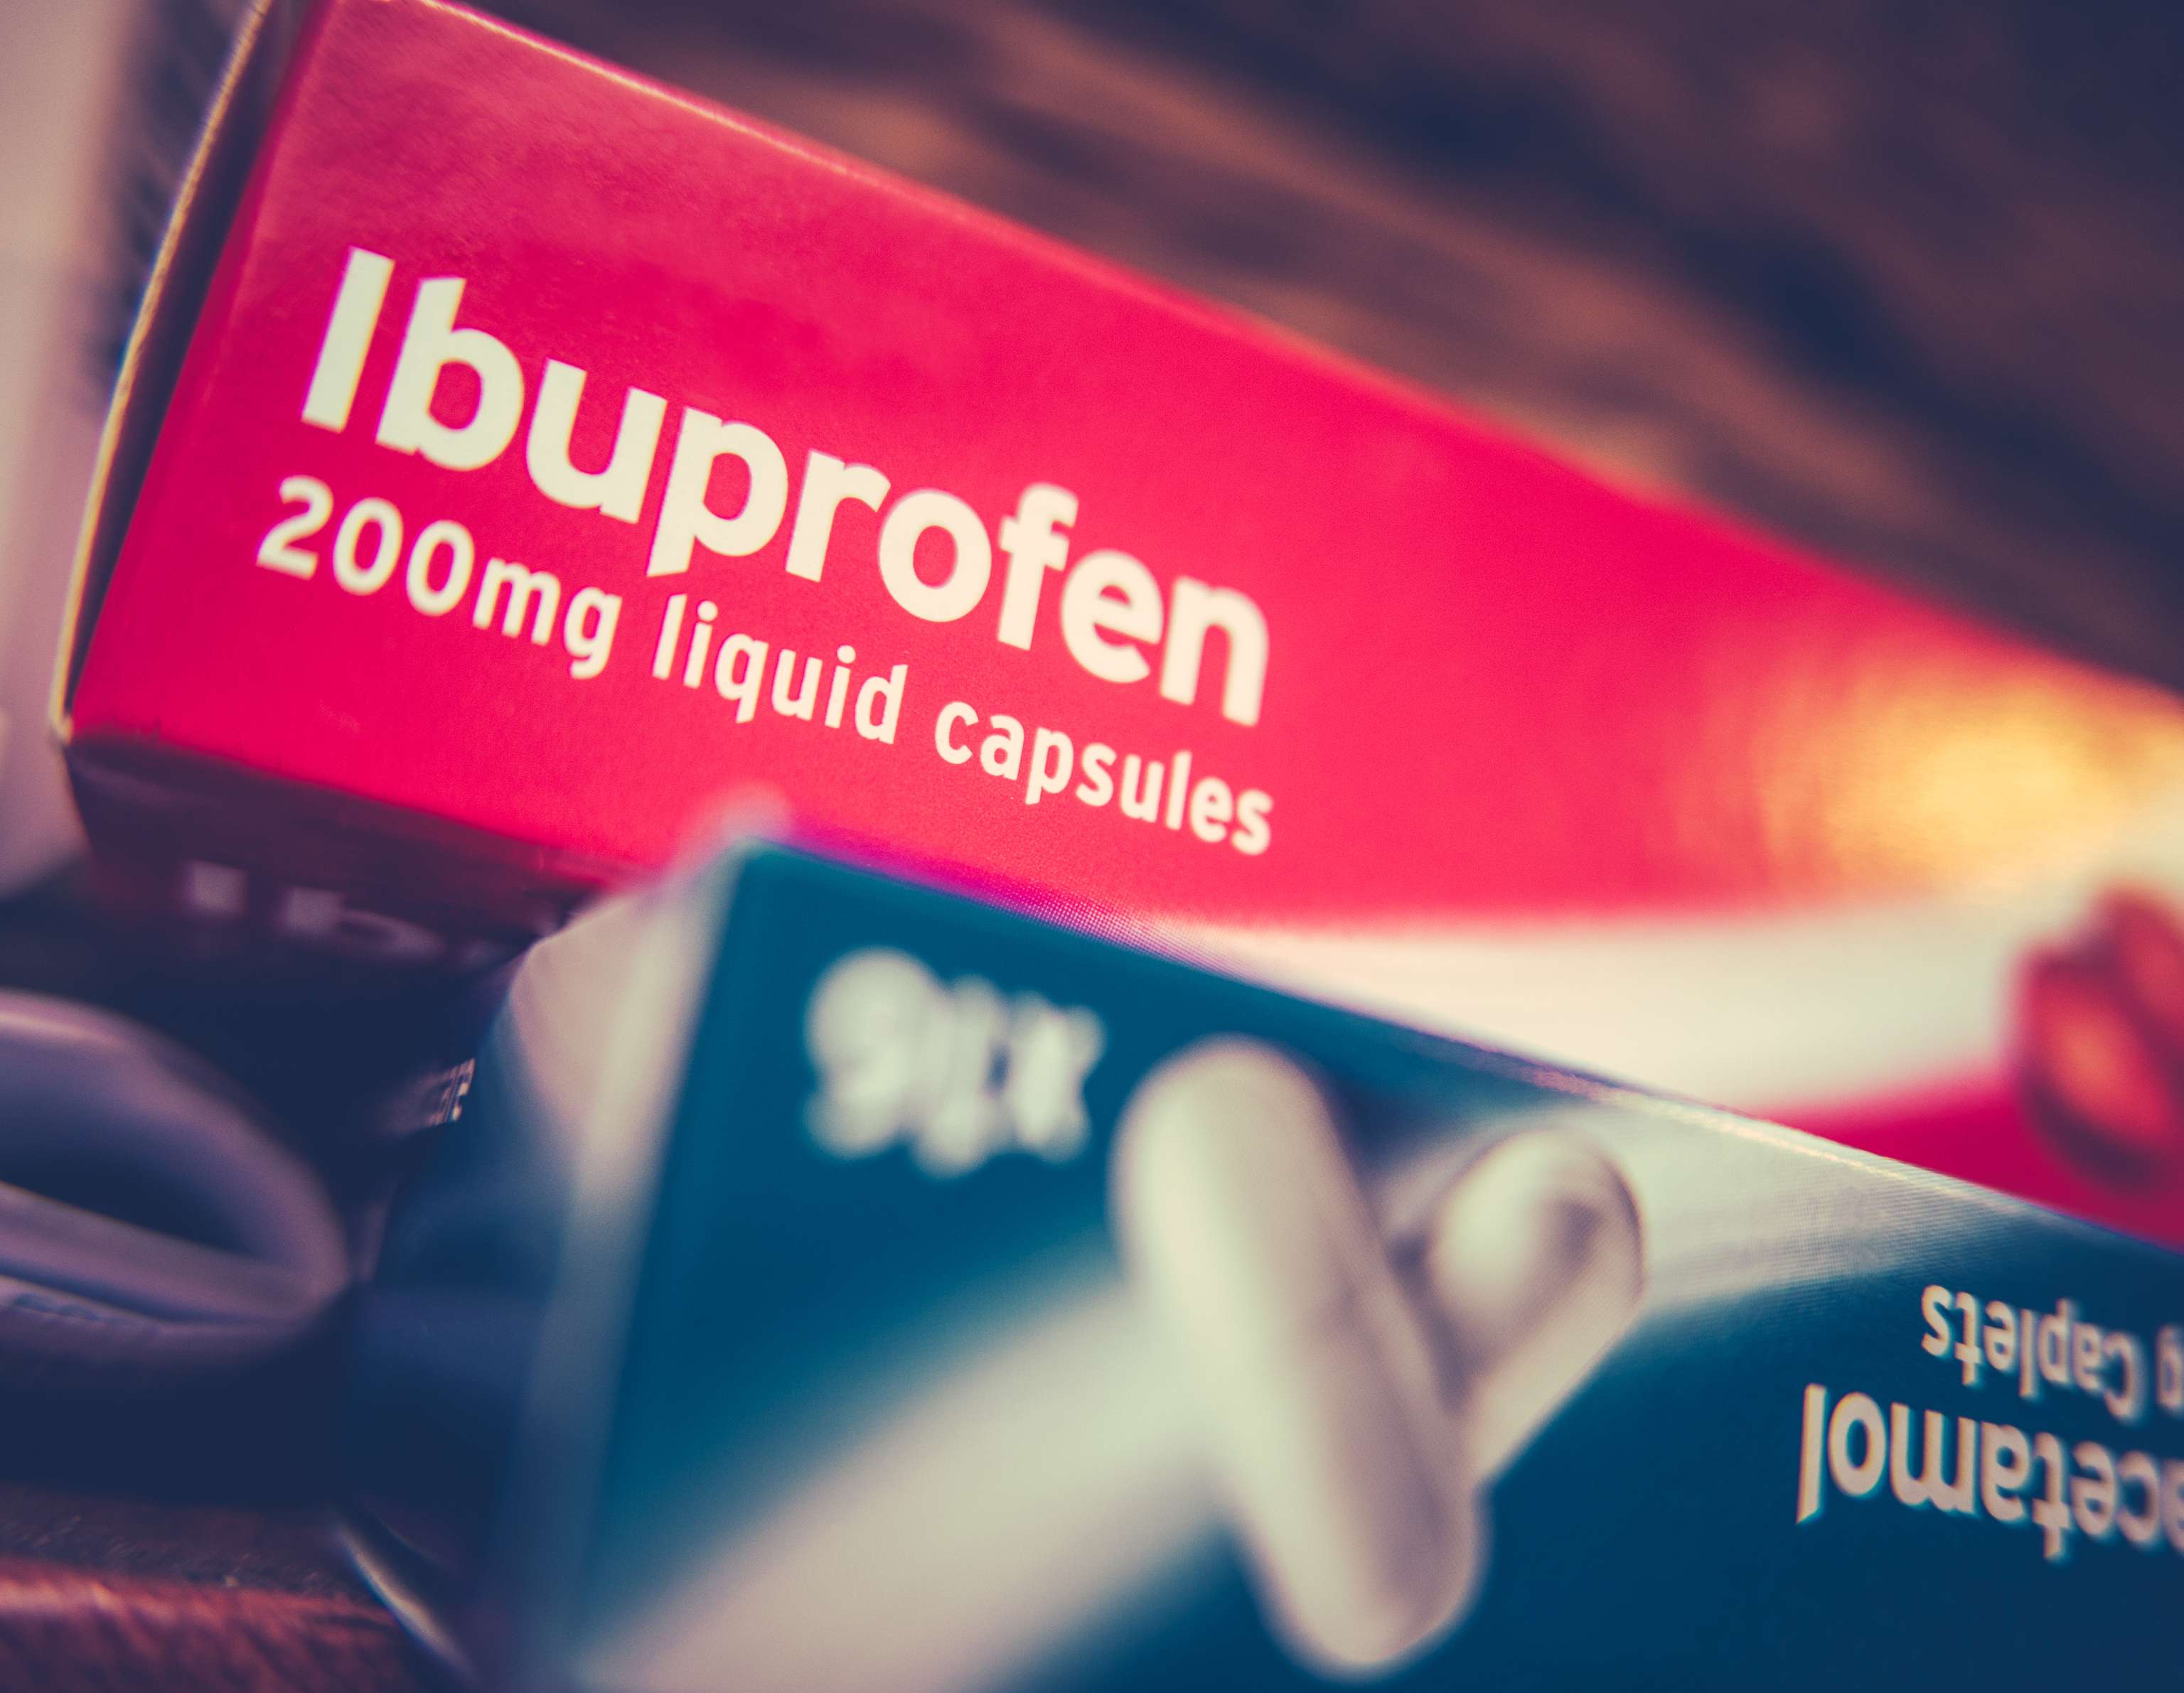 Comparison of ibuprofen and paracetamol in children under 2 years of age